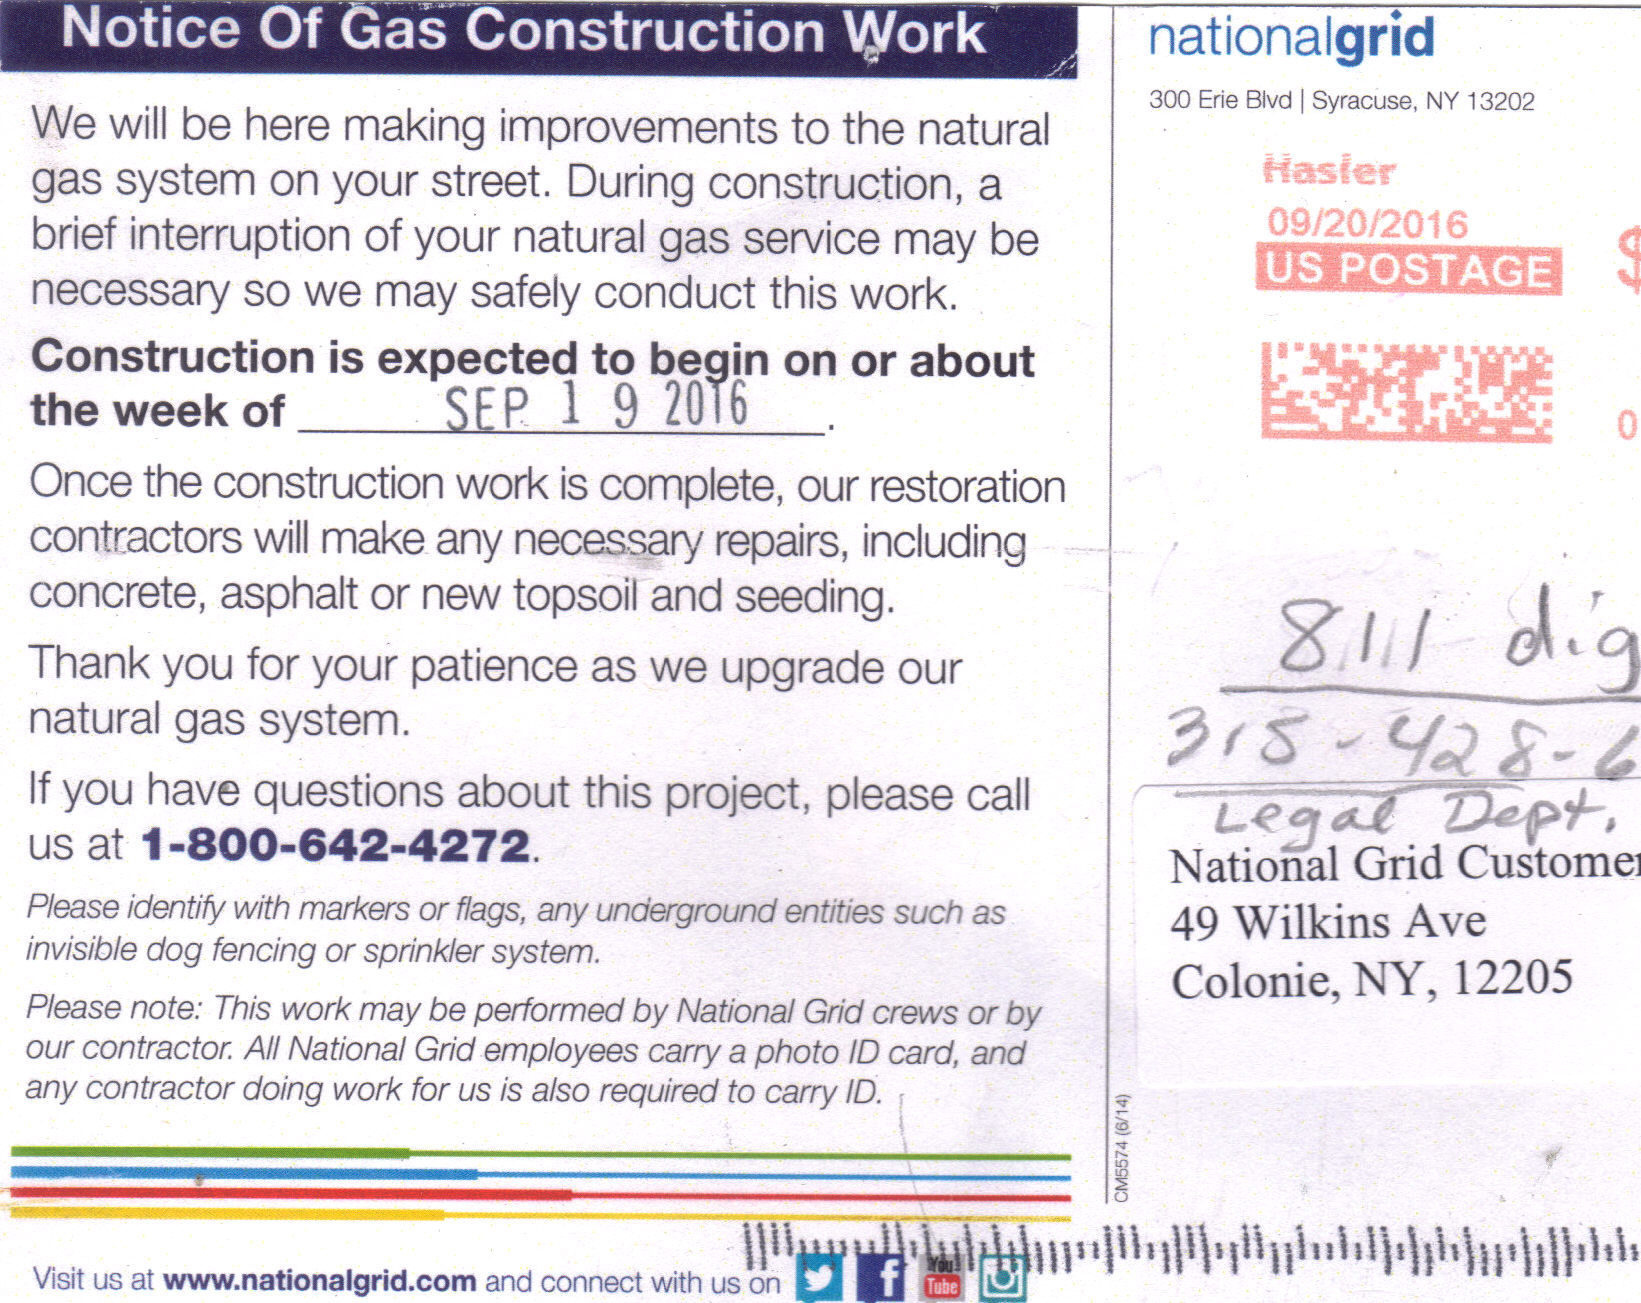 What are some facts about the National Grid electric company?